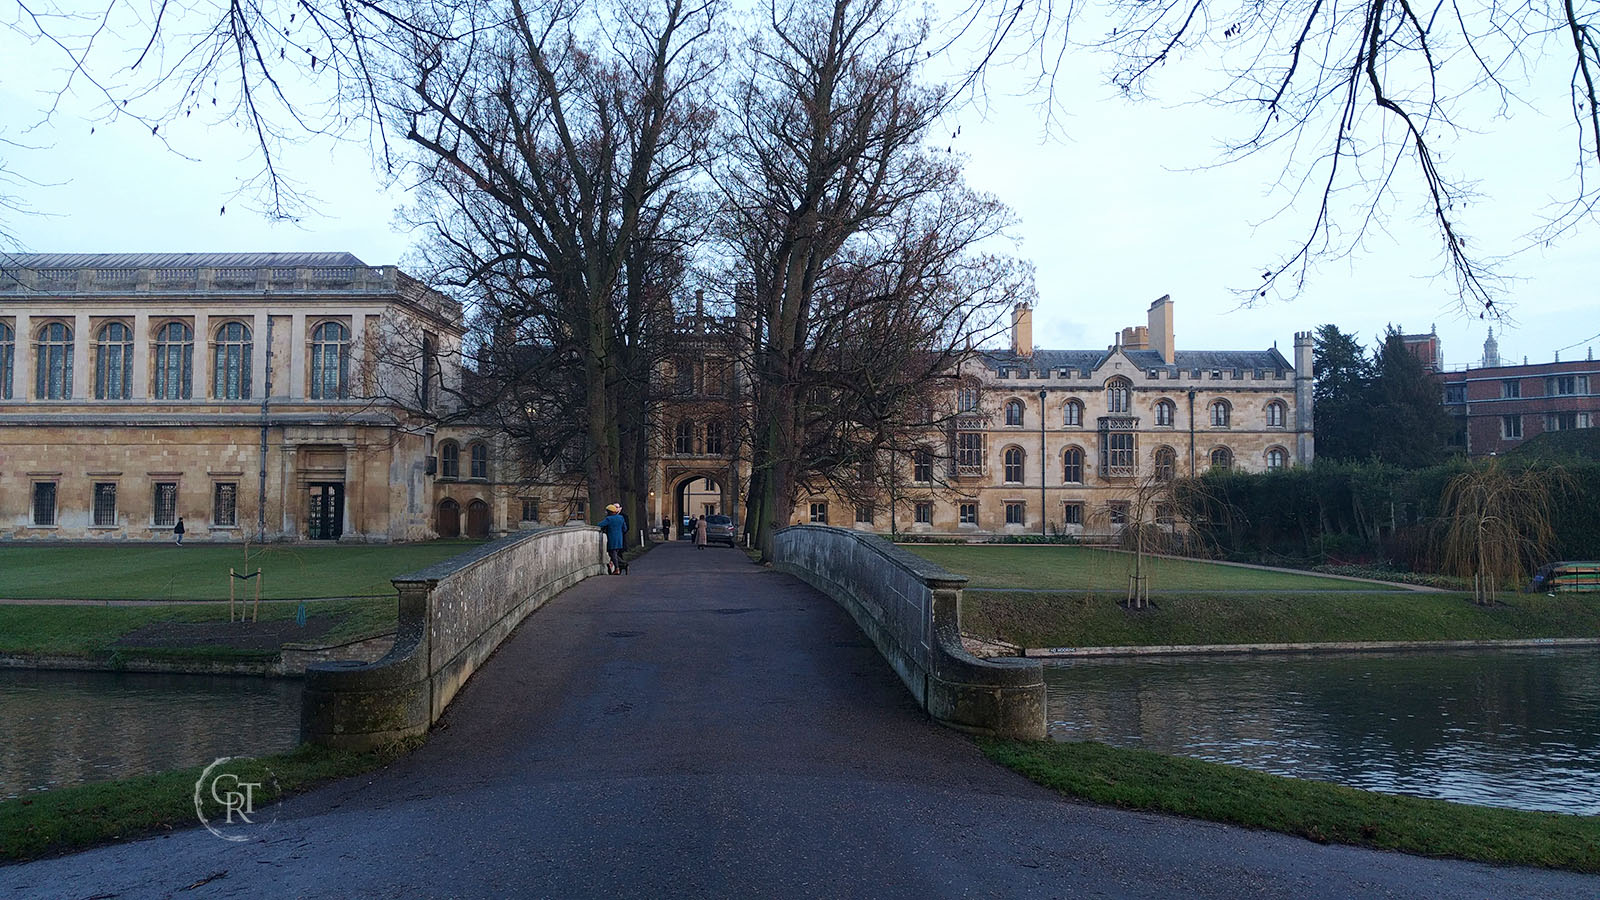 Looking over Trinity bridge, towards the Wren library and New Court